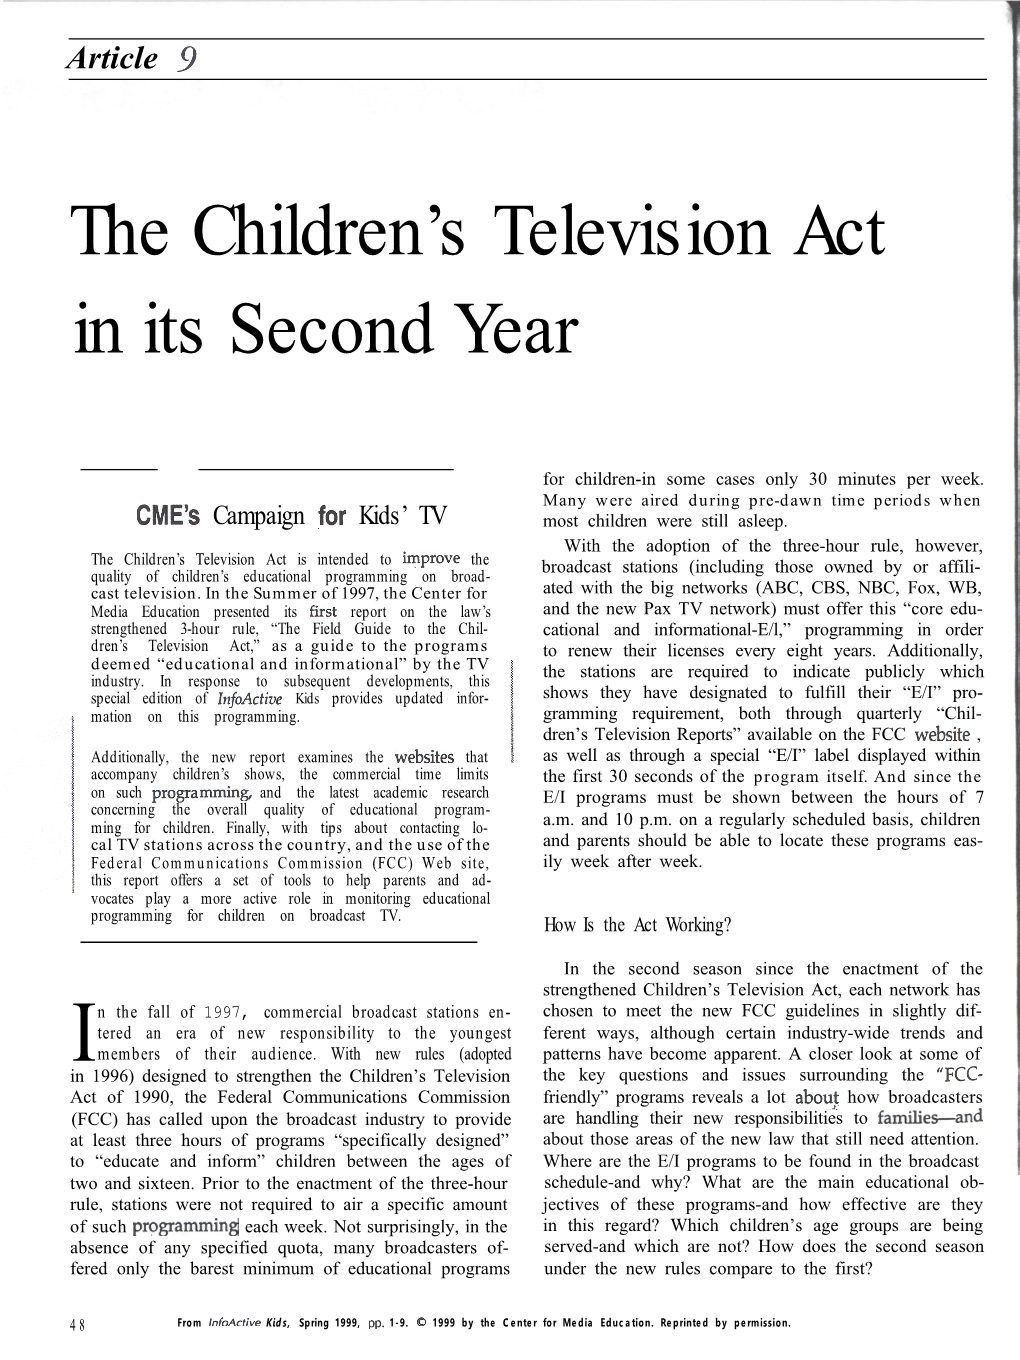 The Children's Television Act in Its Second Year